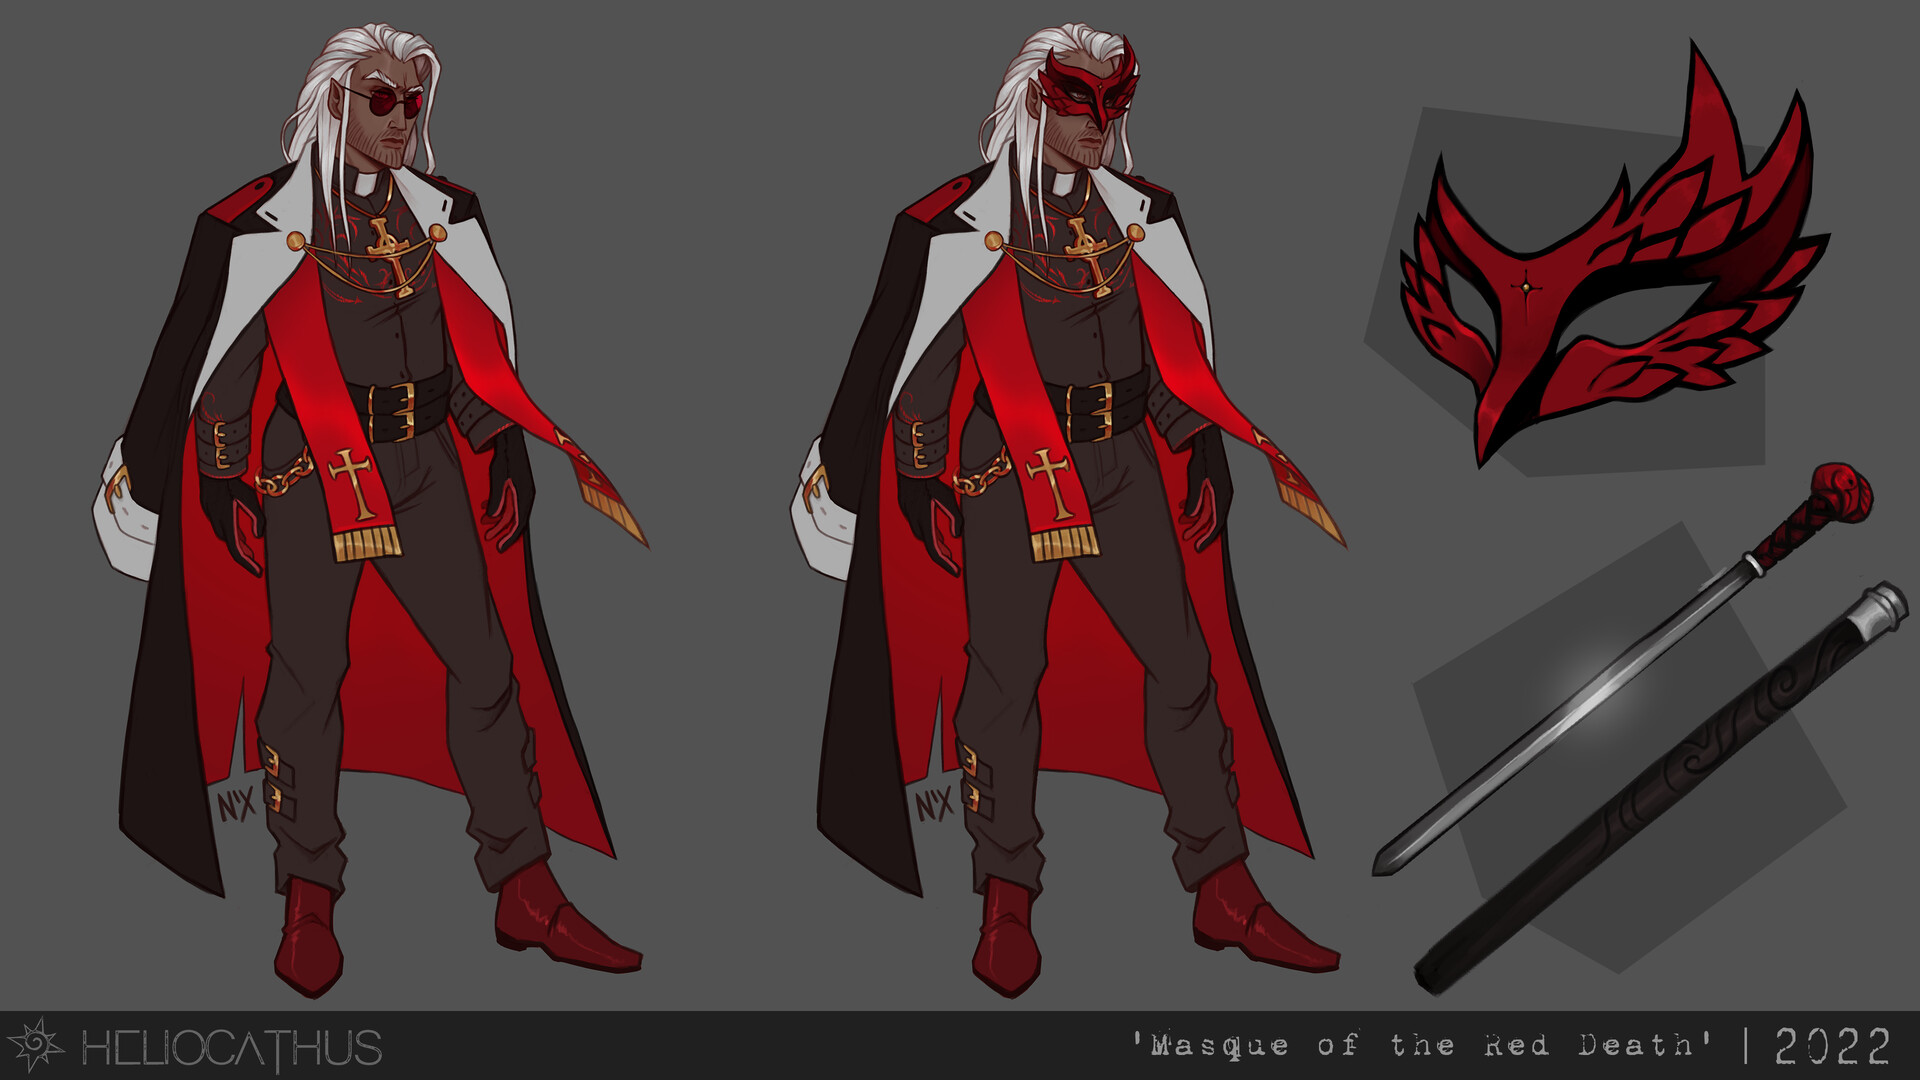 ArtStation - Masque of the Red Death - character design commission